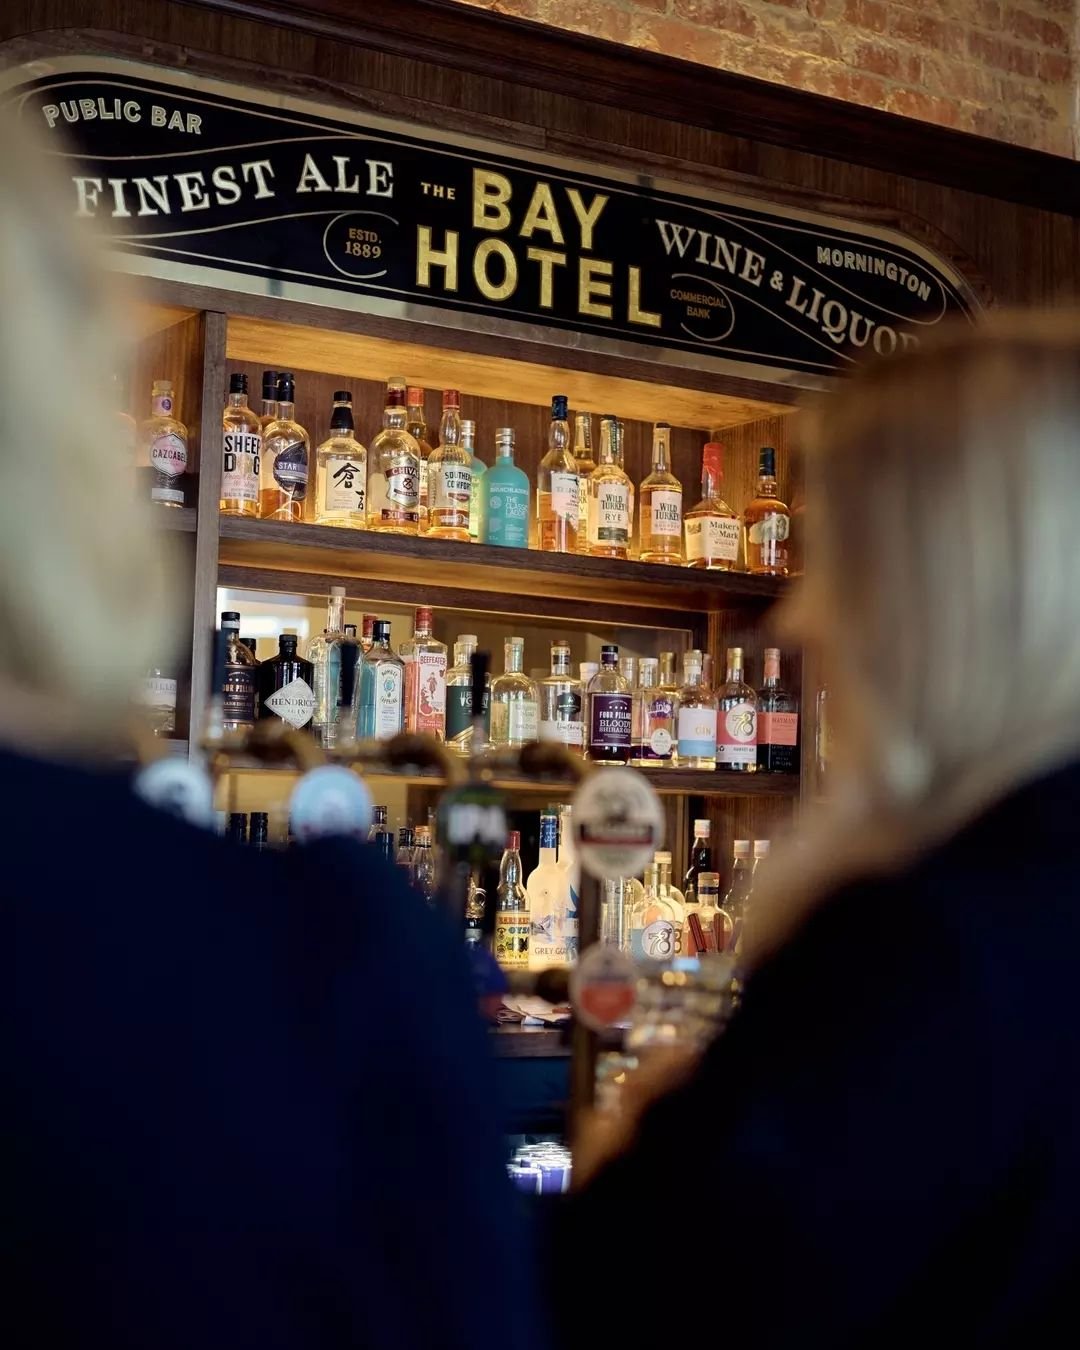 Midweek drinks look better at The Bay. Happy Hour's on from 4pm. We'll see you at the bar. #thebayhotelmornington